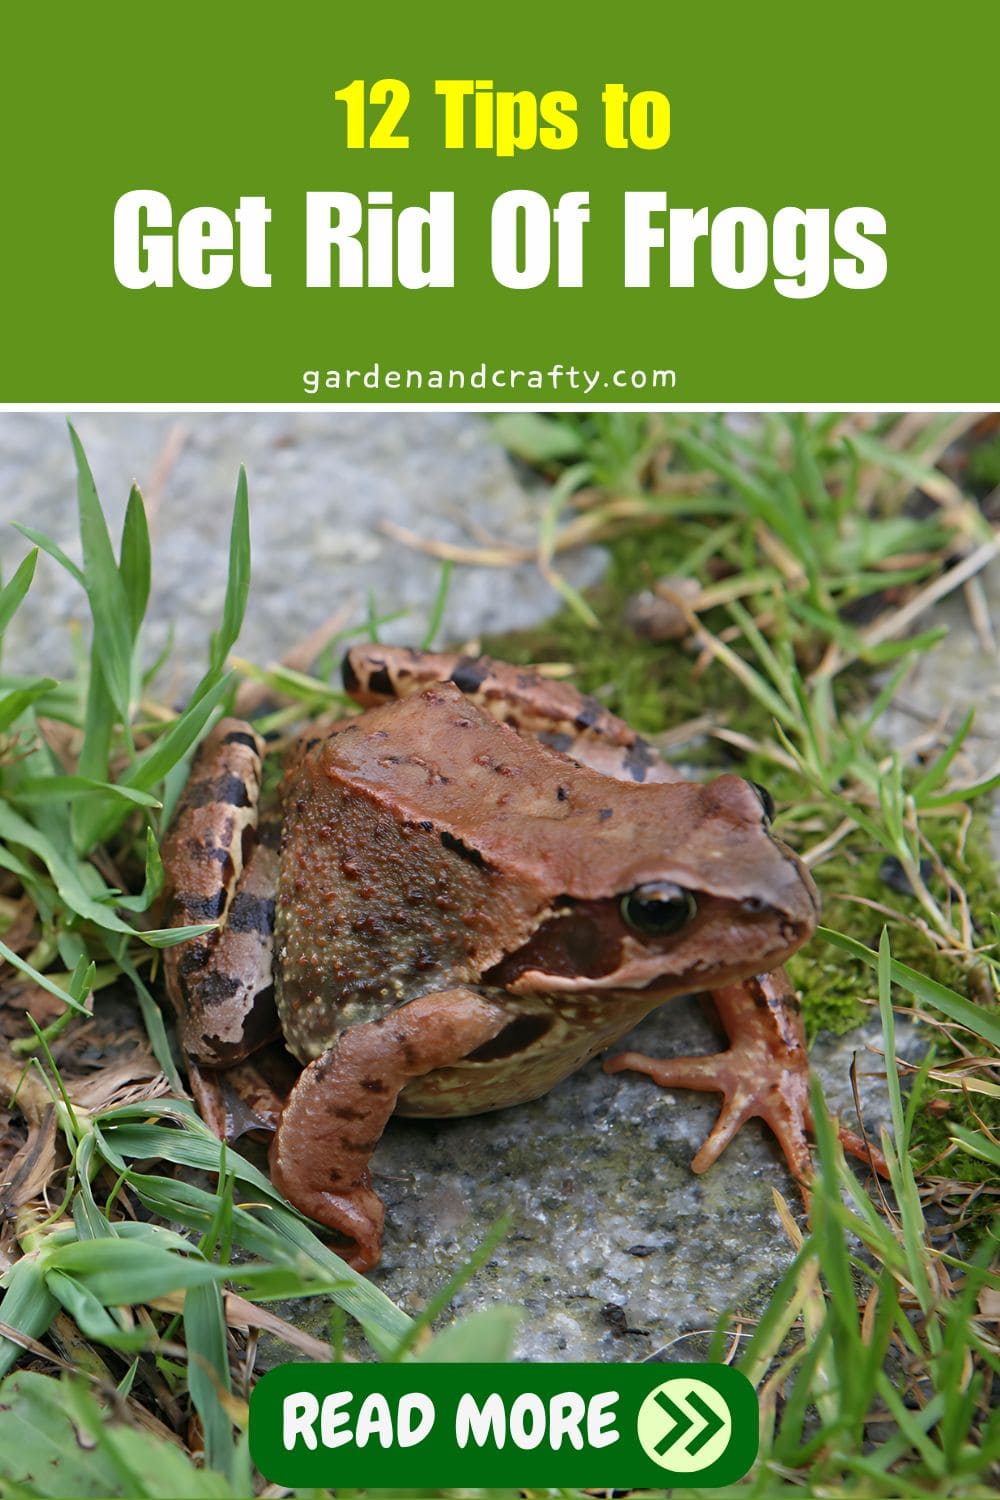 How to Get Rid of Frogs Effectively